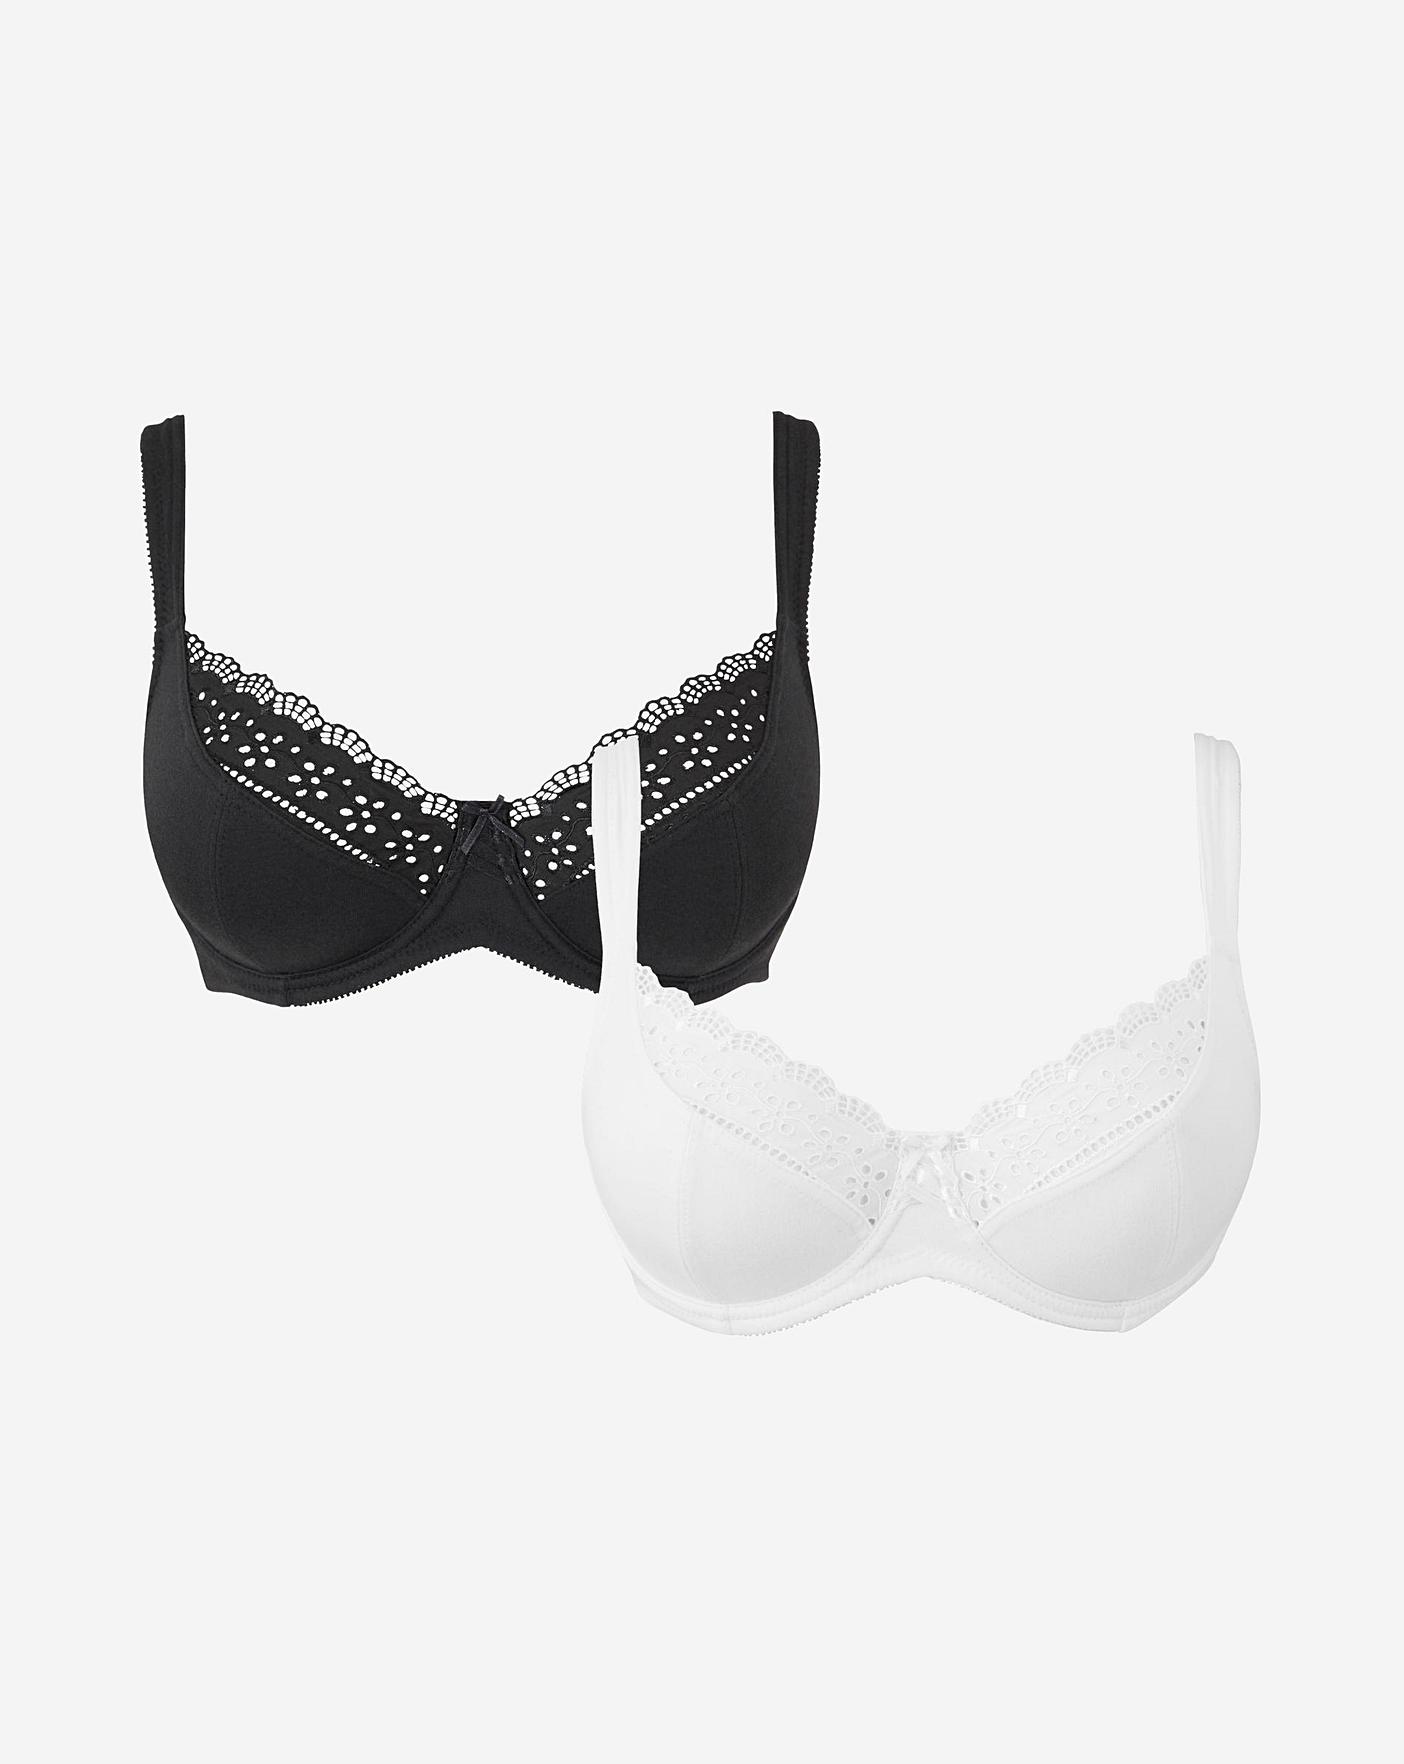 Black/White Non Pad Full Cup Bras 2 Pack